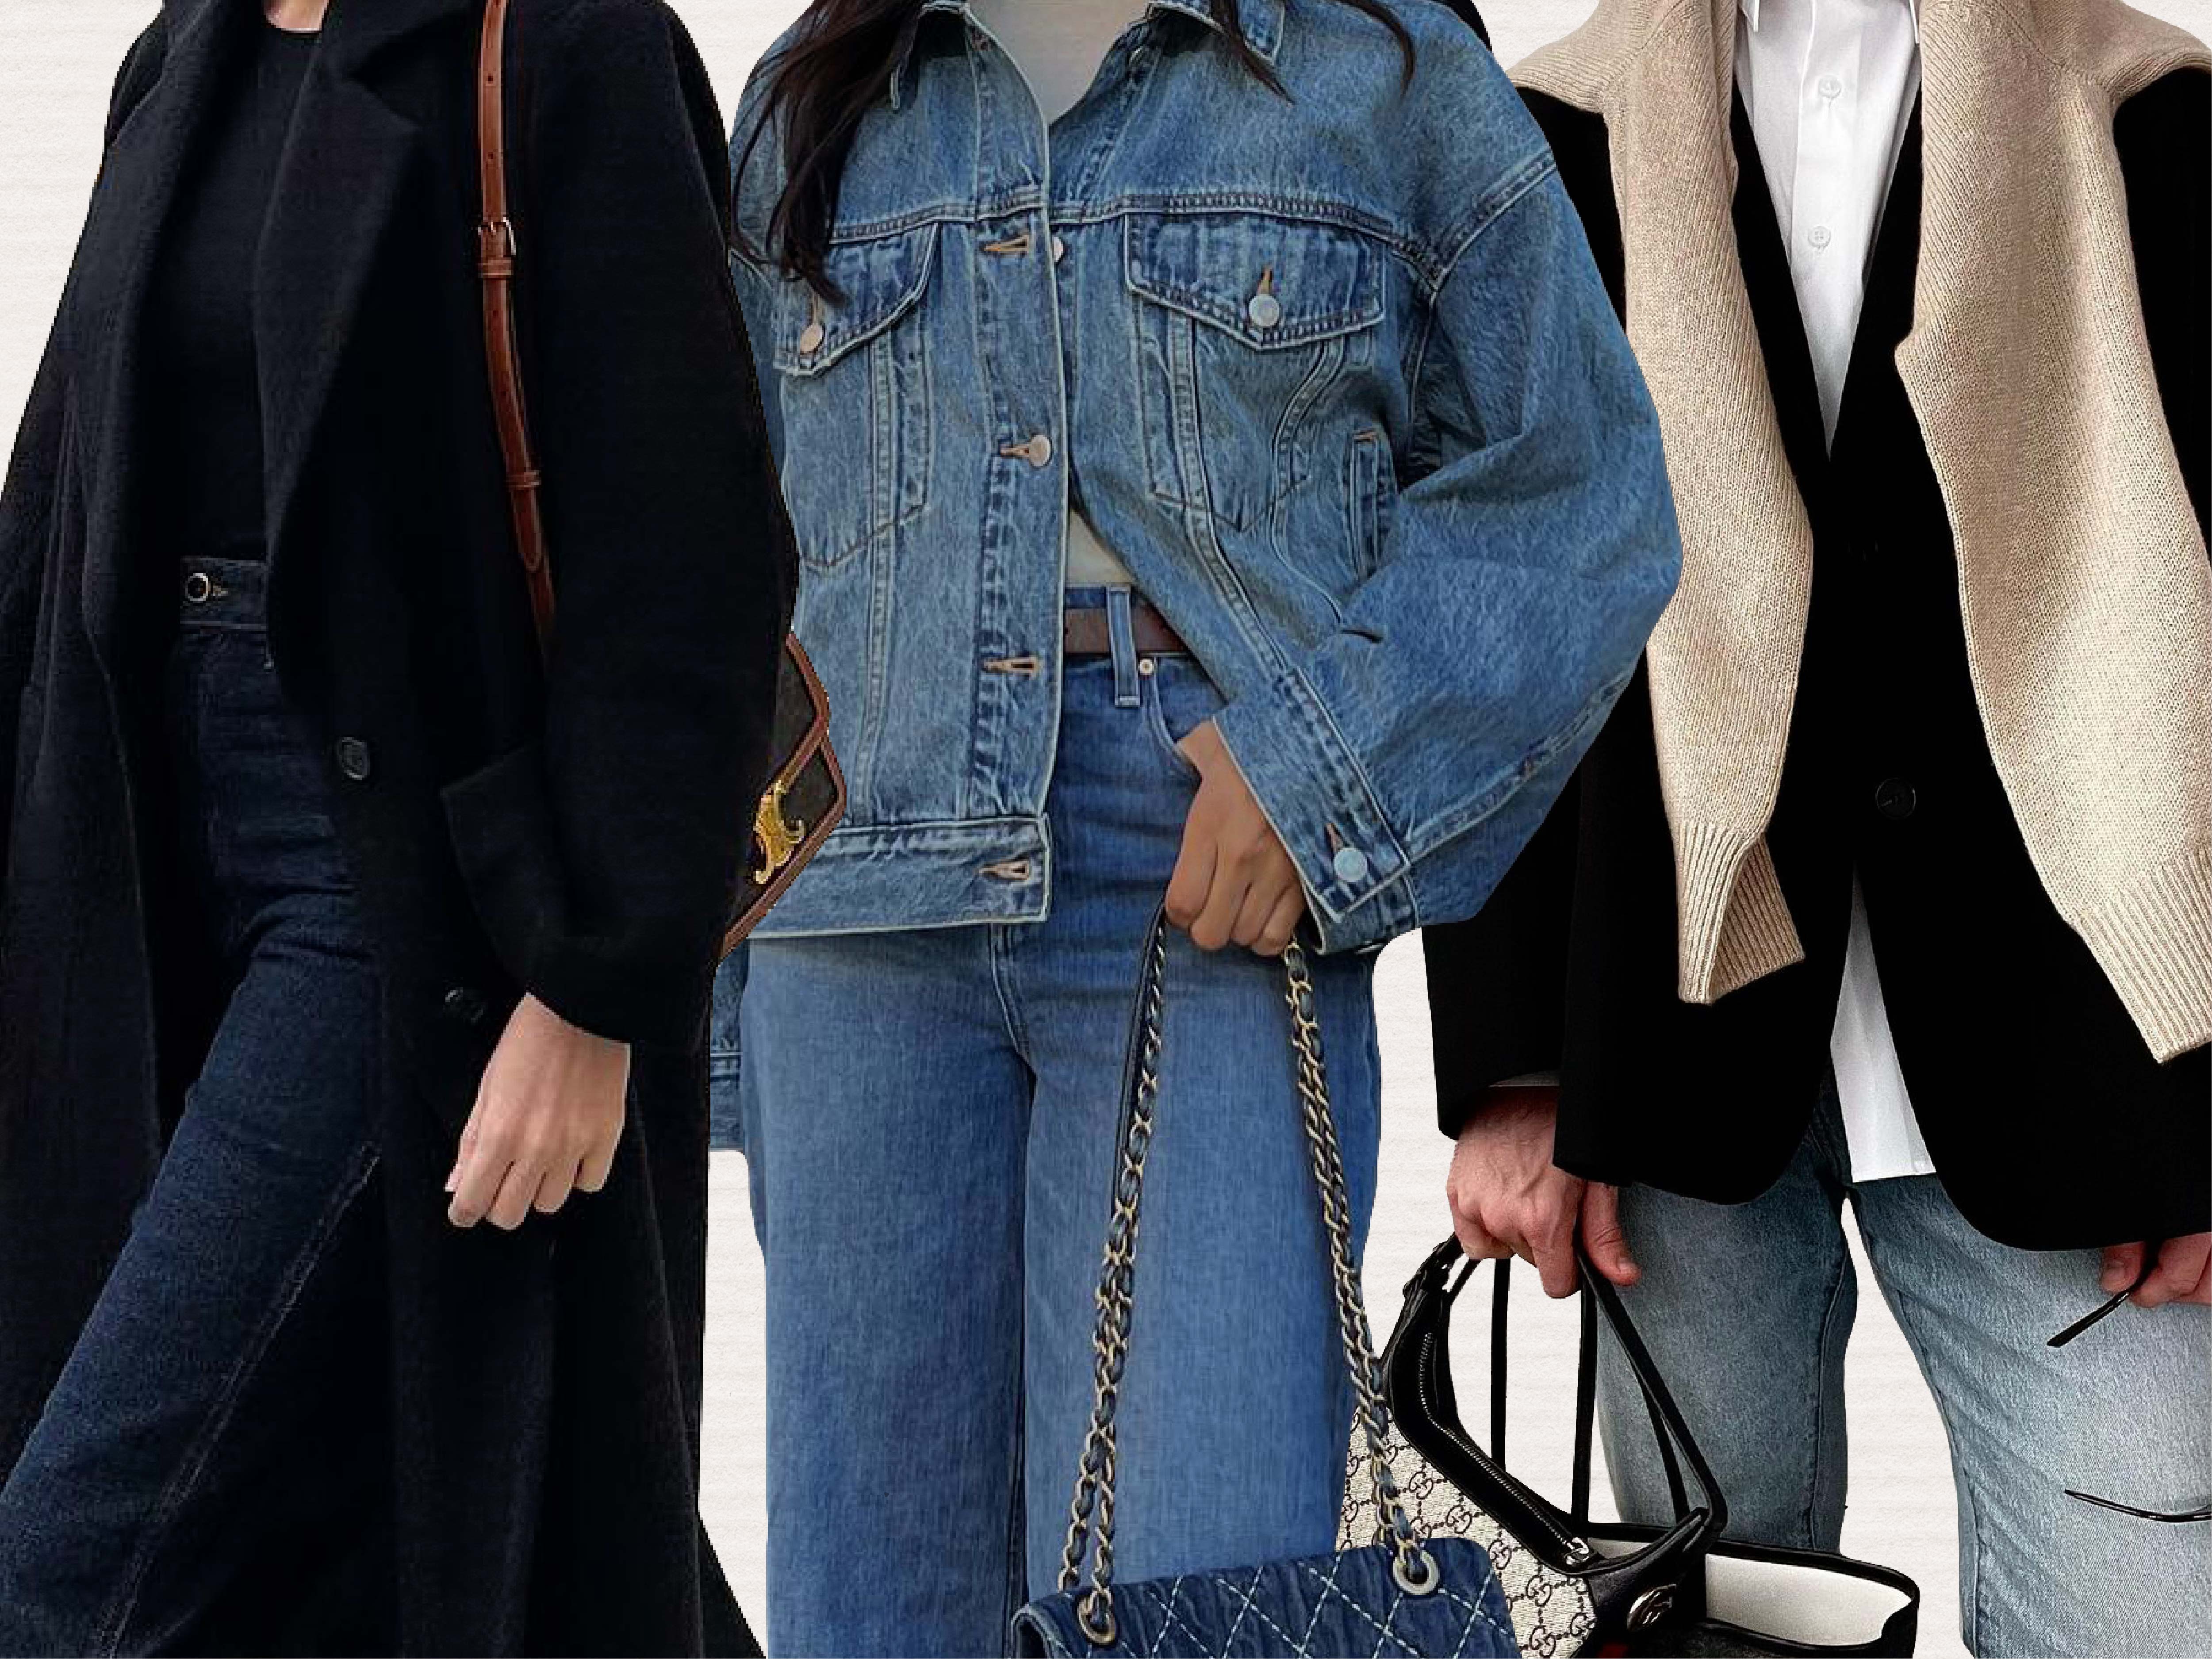 The best jeans according to Who What Wear editors